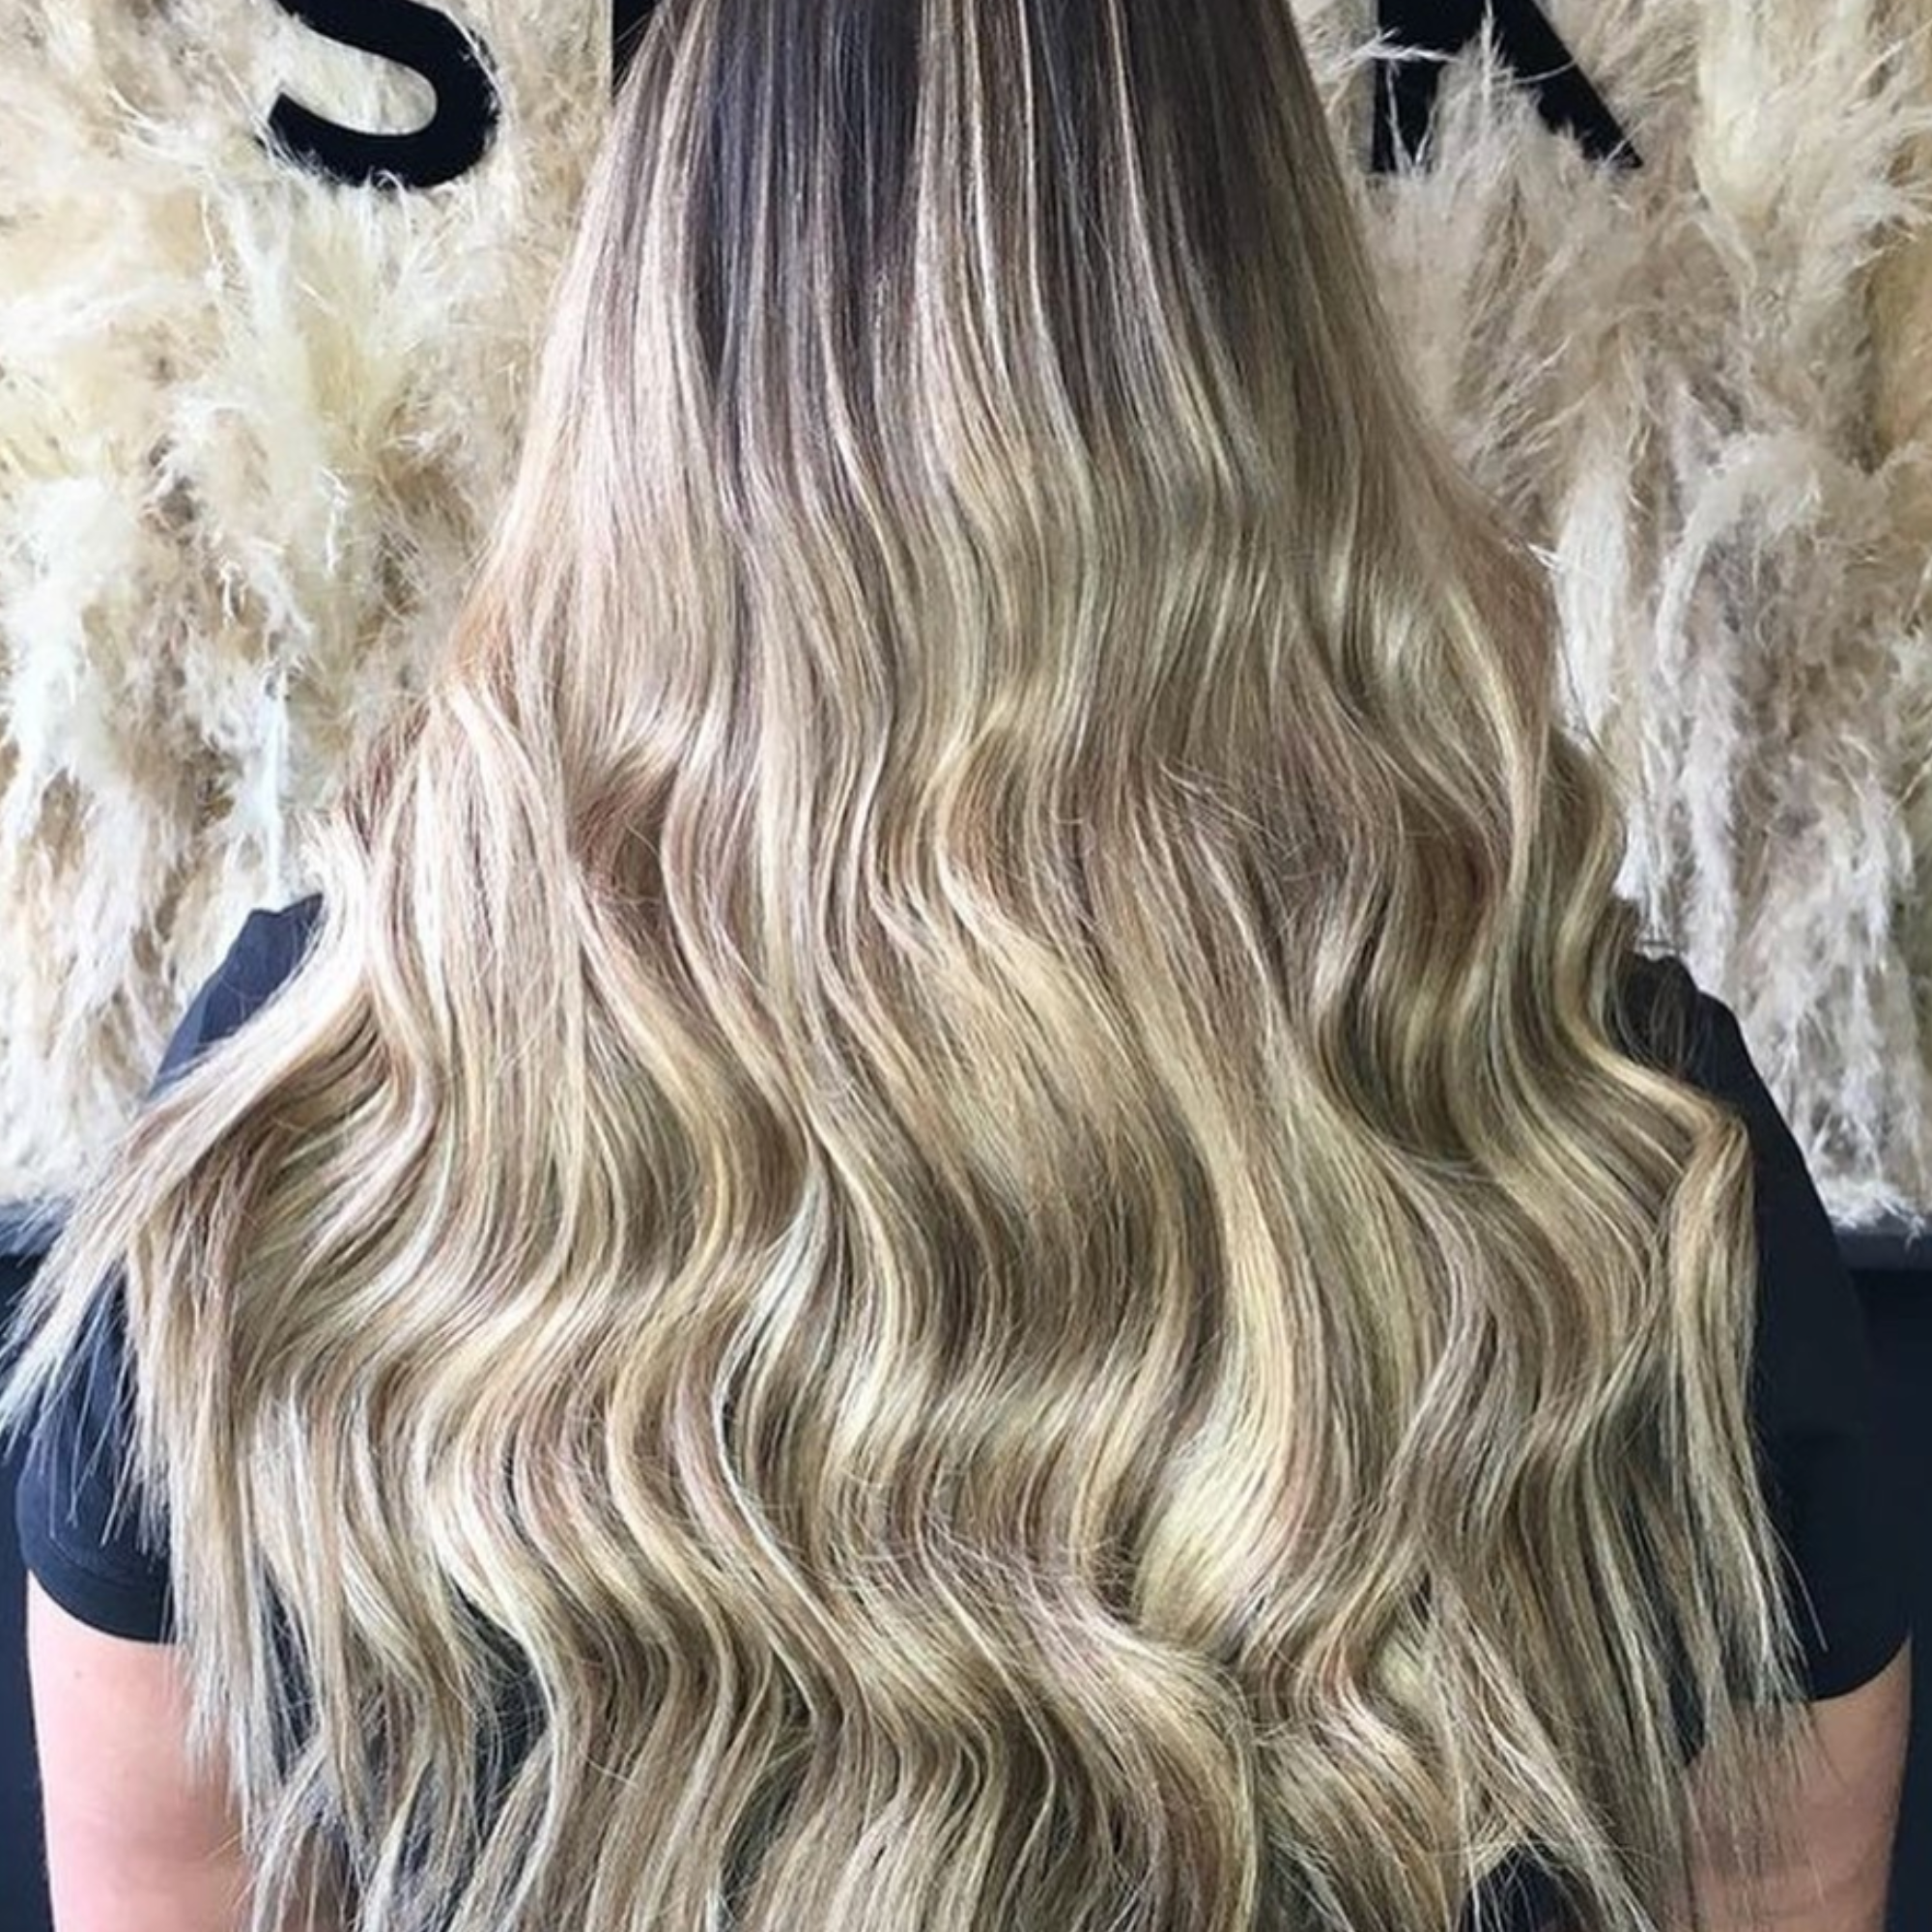 22" Stick Tip Extensions Rooted Coachella